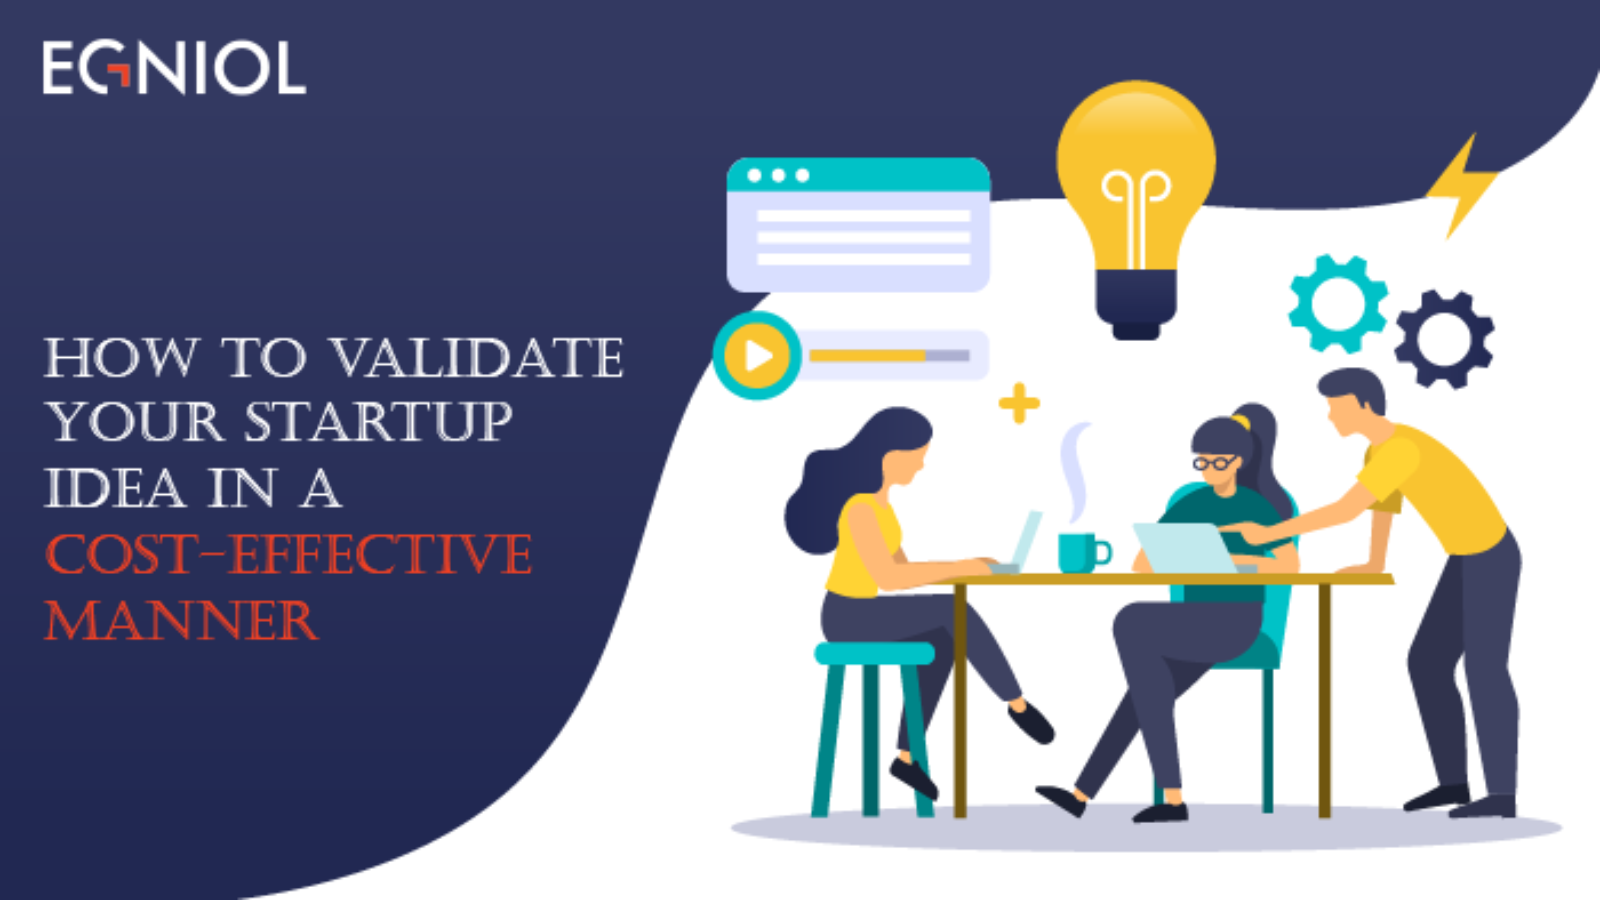 How To Validate Your Startup Idea In A Cost-Effective Manner - By Egniol